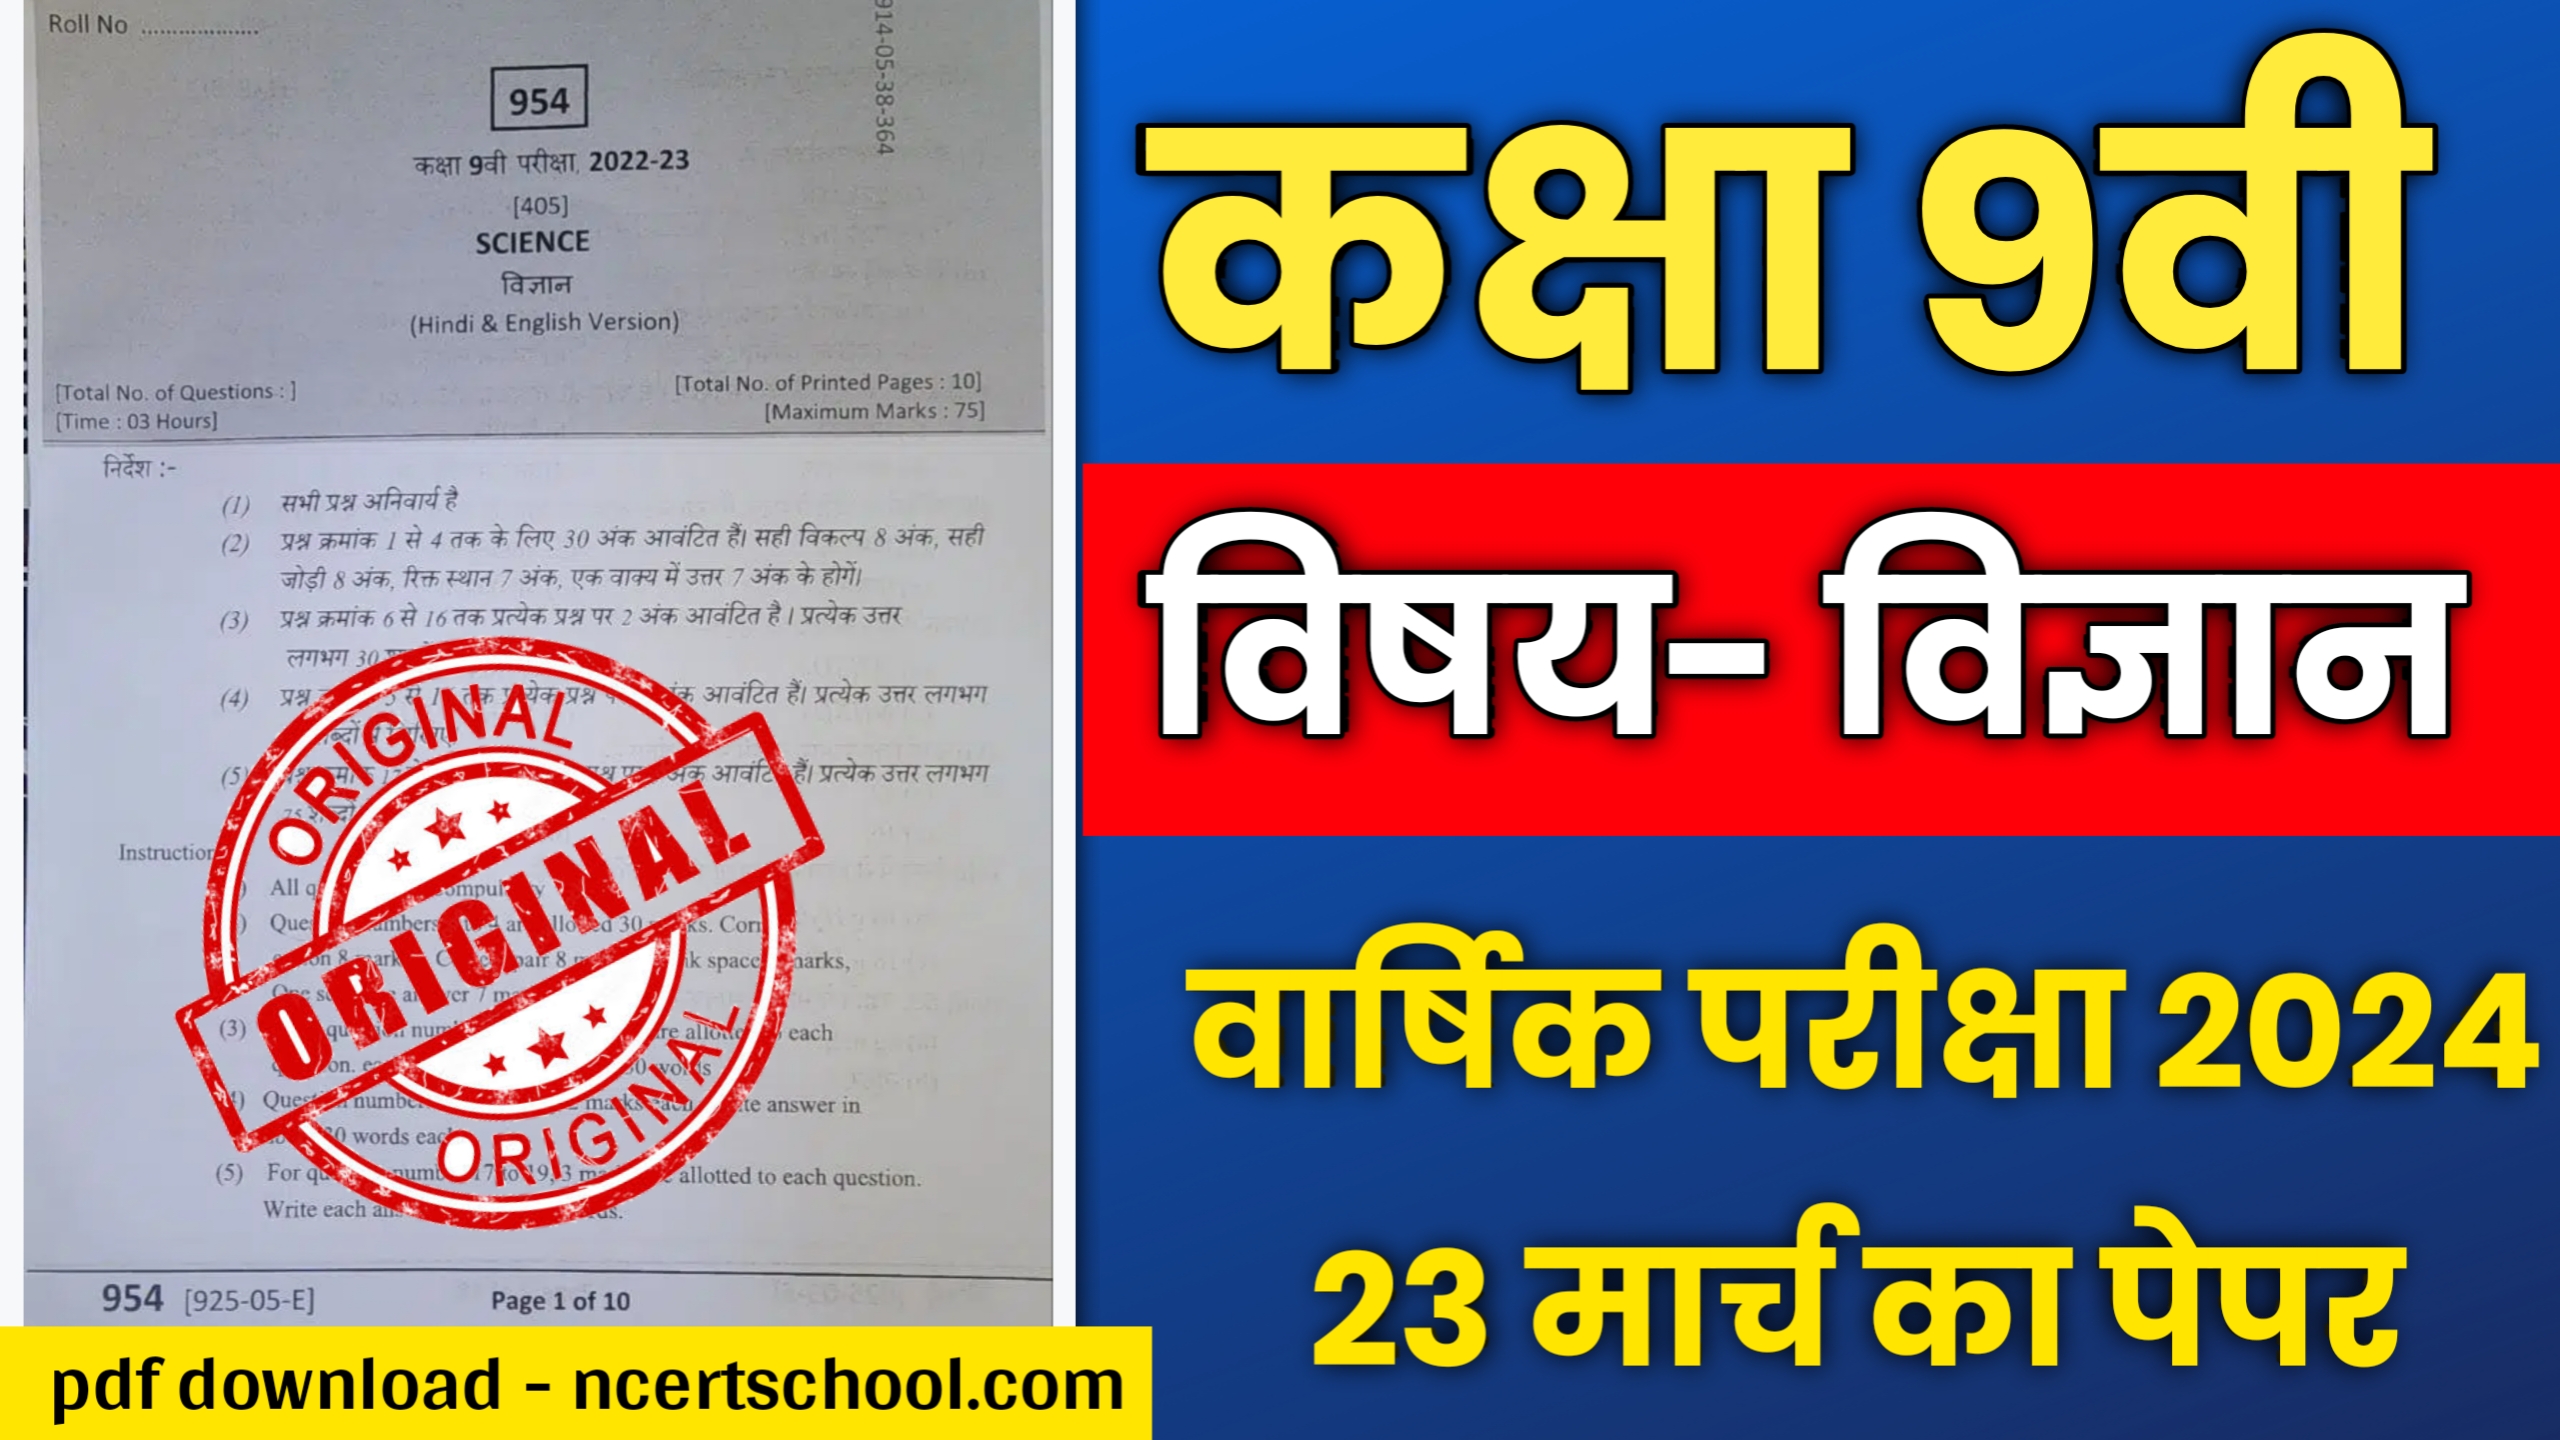 Mp board Class 9th Science Varshik Paper 2024Mp board Class 9th Science Varshik Paper 2024, class 9th science varshik paper 2024,class 9th science paper 2024,varshik paper 2024 class 9th,class 9th vigyan varshik paper 2024,science paper 9th class 2024,class 9th science annual exam paper 2024,science annual exam paper 2024 class 9th,class 10th science varshik paper 2024,class 9th vigyan paper 2024,class 9th science ka paper,science annual exam paper 2024 class 10th,class 9th vigyan ka varshik paper,class 10th science paper 2024